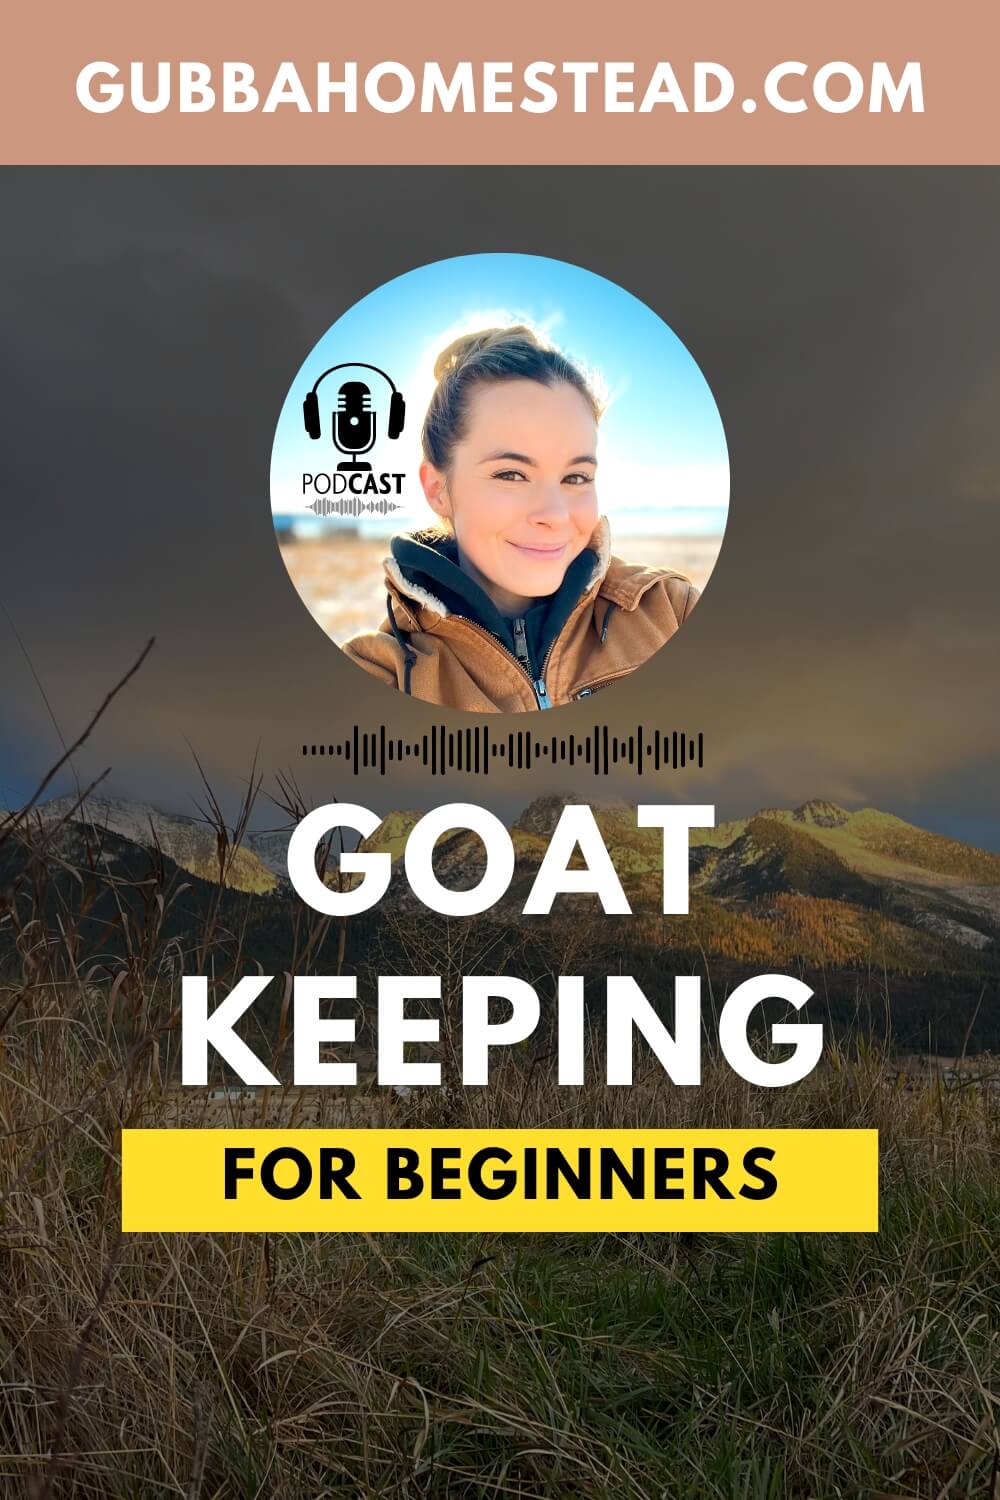 Goat-keeping for Beginners